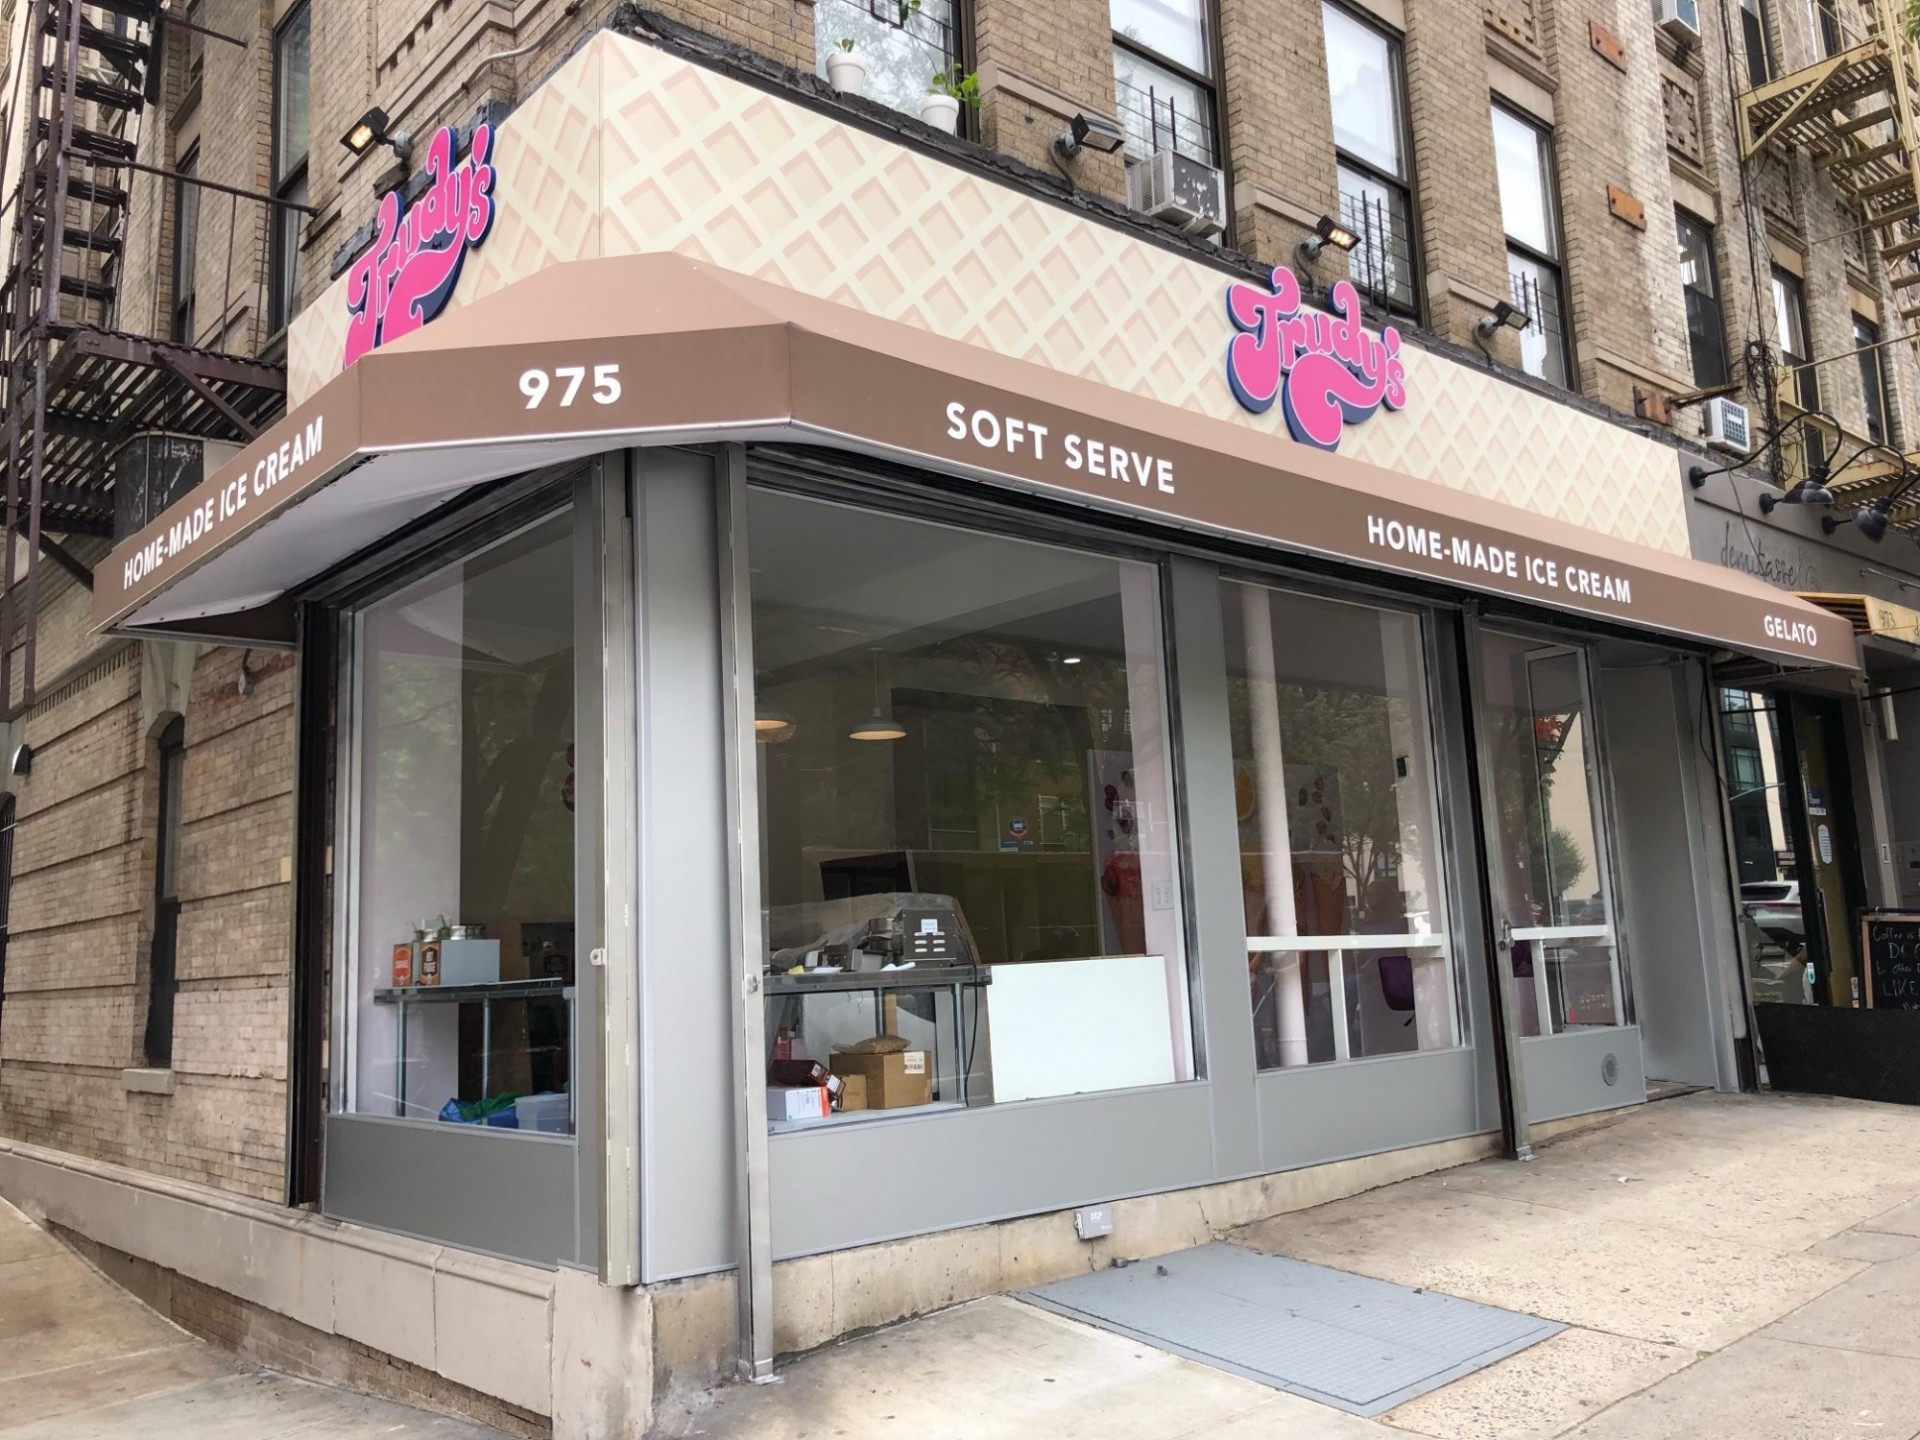 A storefront for Trudy's Ice Cream, with a waffle cone marque and Trudy's in big pink font.